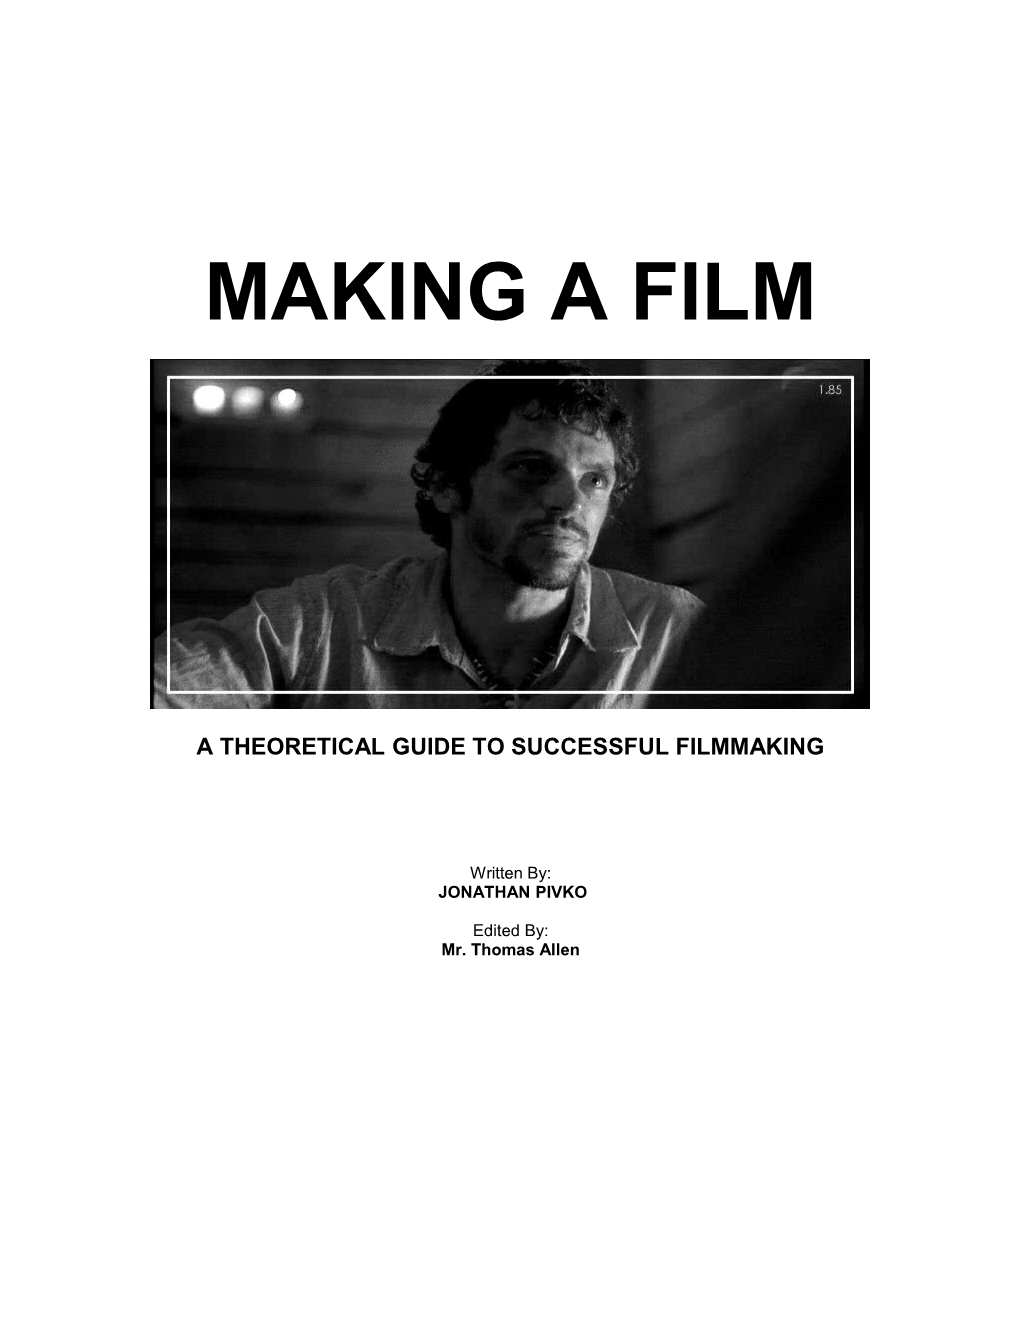 A Theoretical Guide to Successful Filmmaking